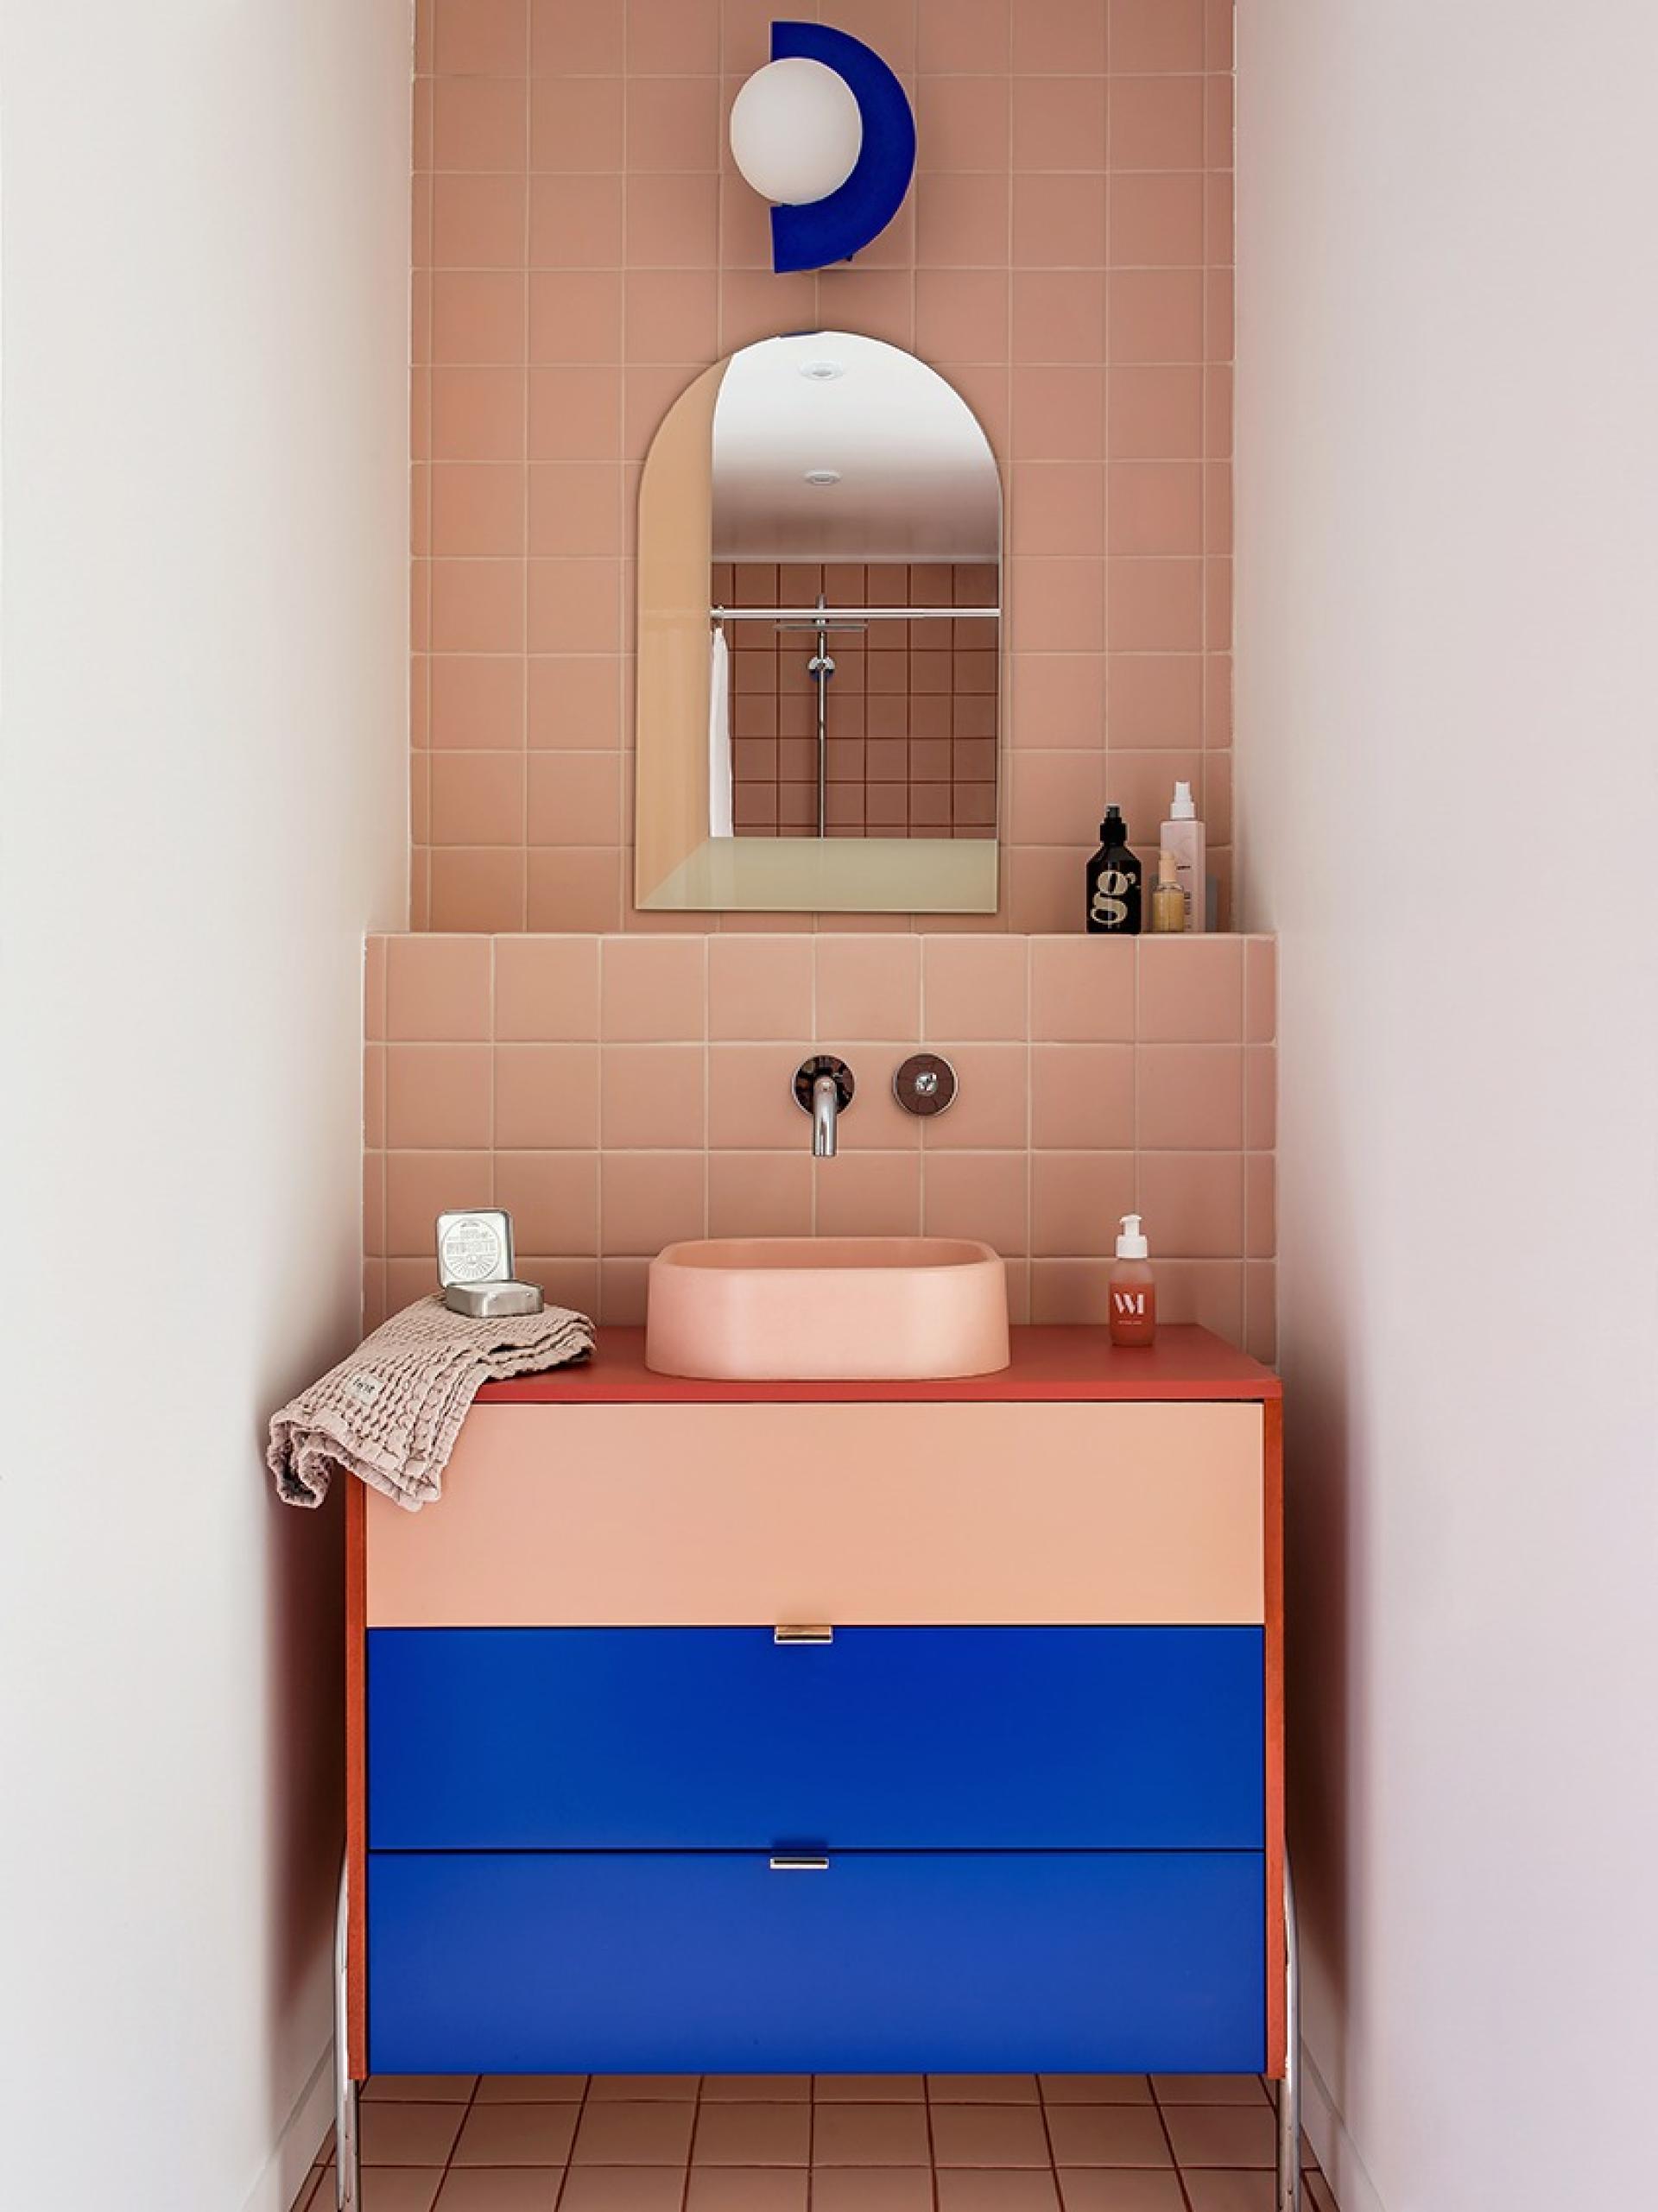 A pop vanity unit in Electric blue and Blush rose